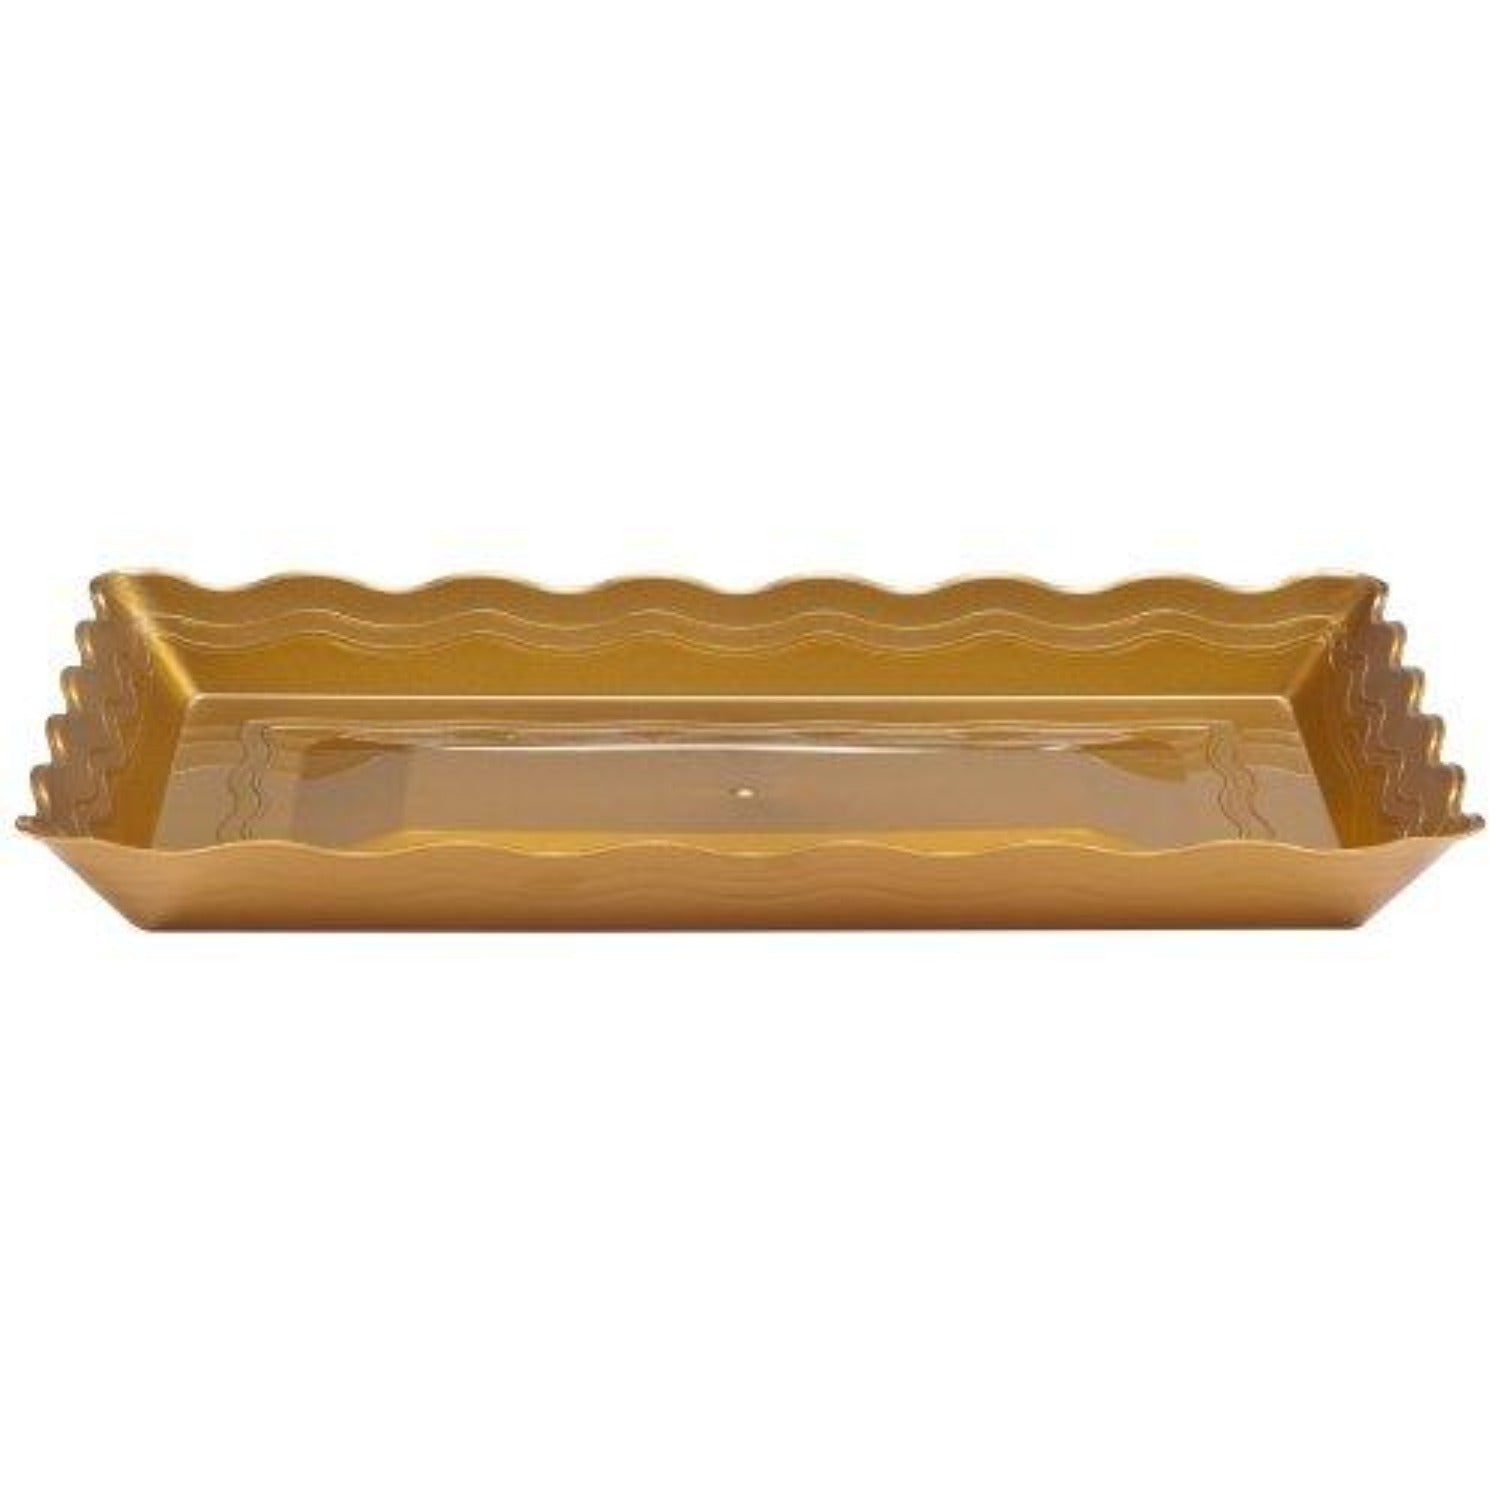 12 Plastic Serving Trays 9x13 Inches Rectangular Disposable Serving Trays  and Platters for Parties | Clear Plastic Serving Platter for Food - Party